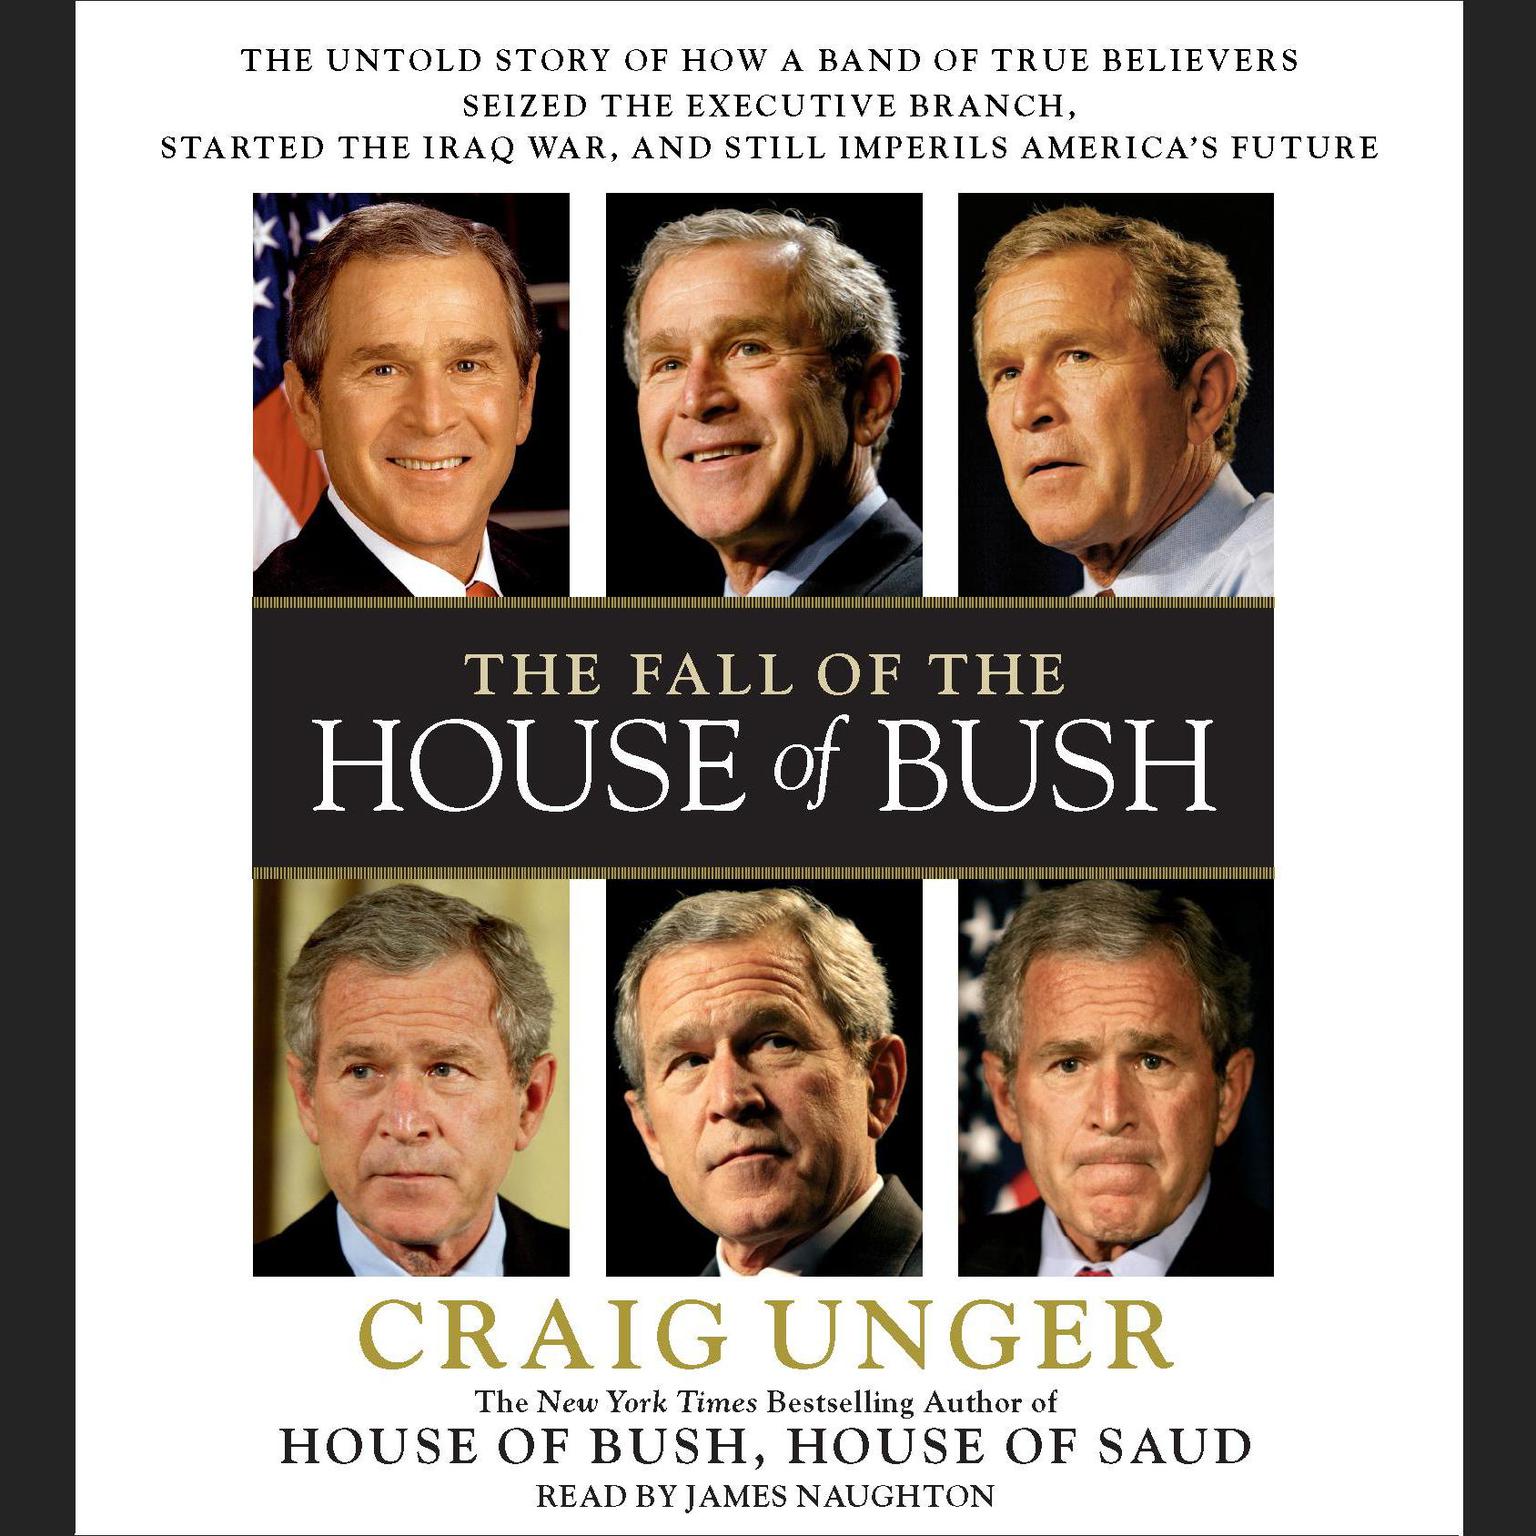 The Fall of the House of Bush (Abridged): The Untold Story of How a Band of True Believers Seized the Executive Branch, Started the Iraq War, and Still Imperils Americas Future Audiobook, by Craig Unger